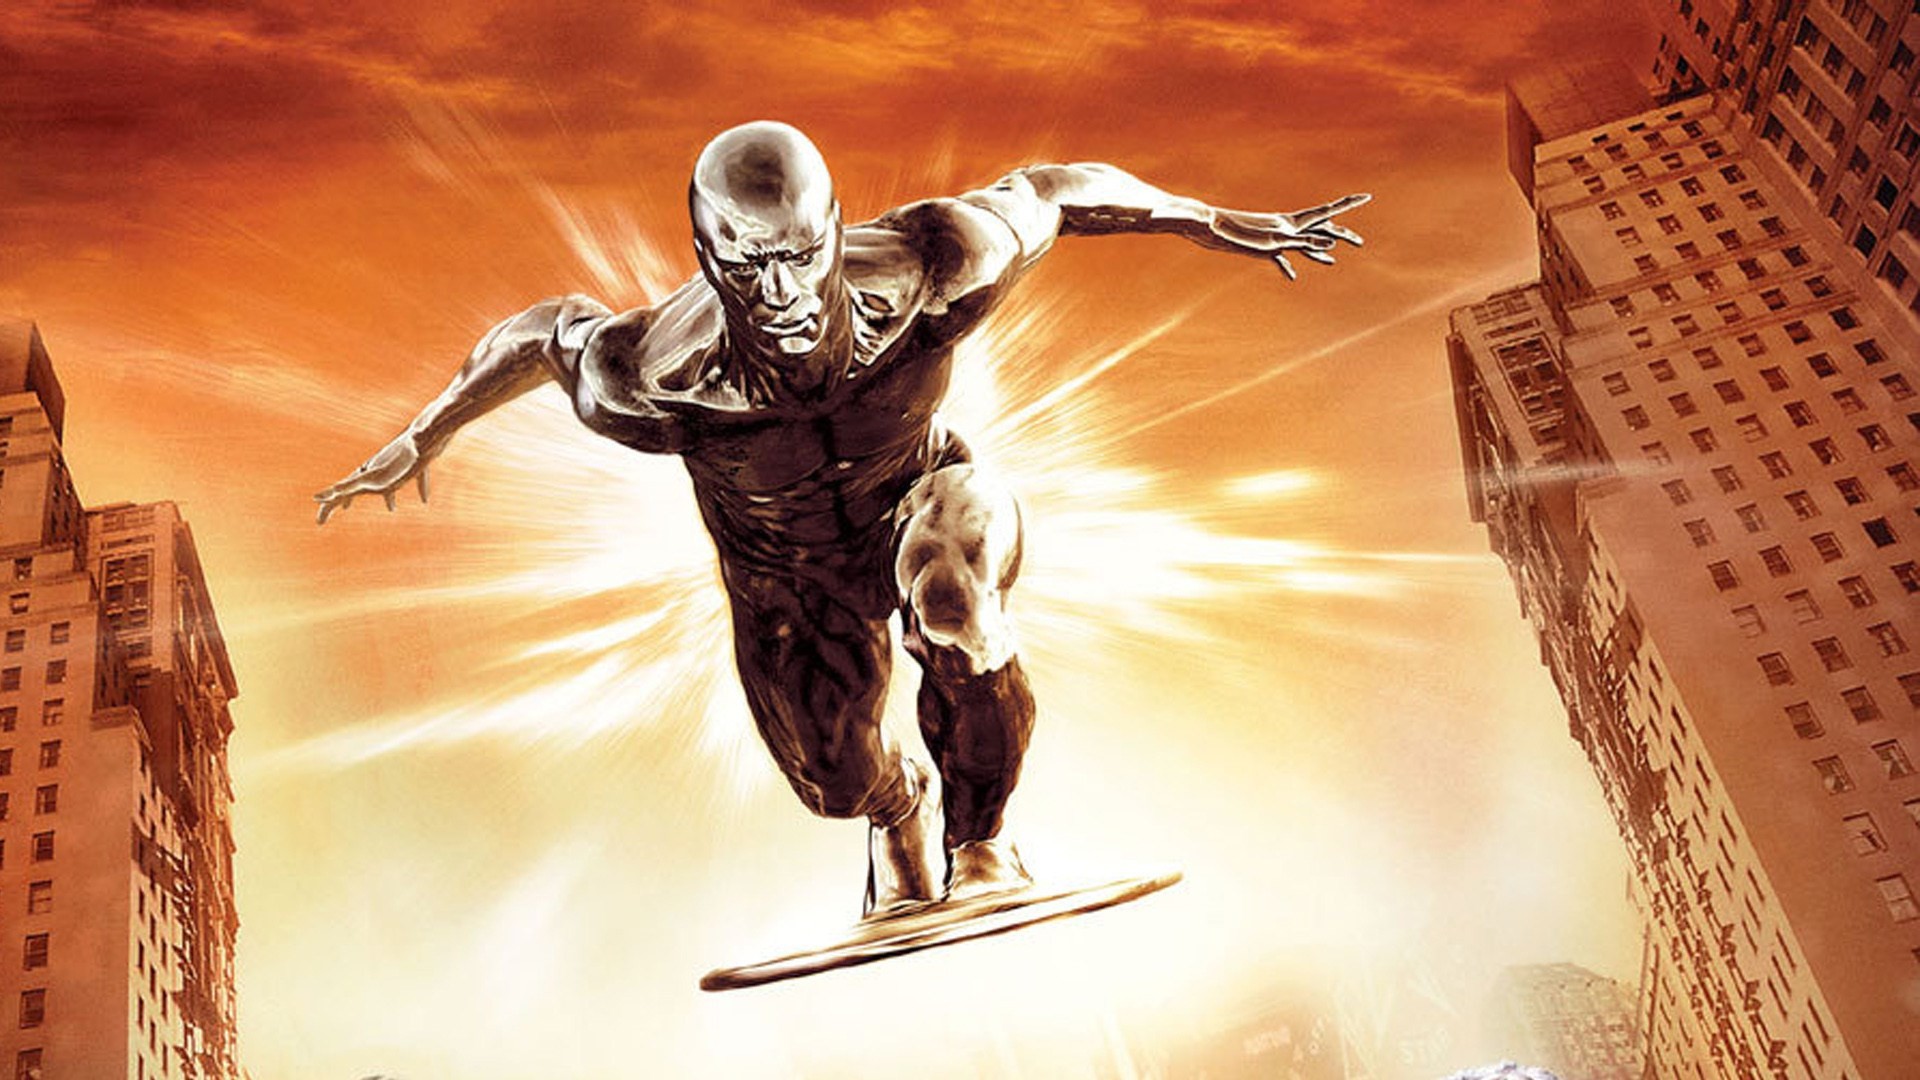 Free screensaver wallpapers for fantastic 4 rise of the silver surfer